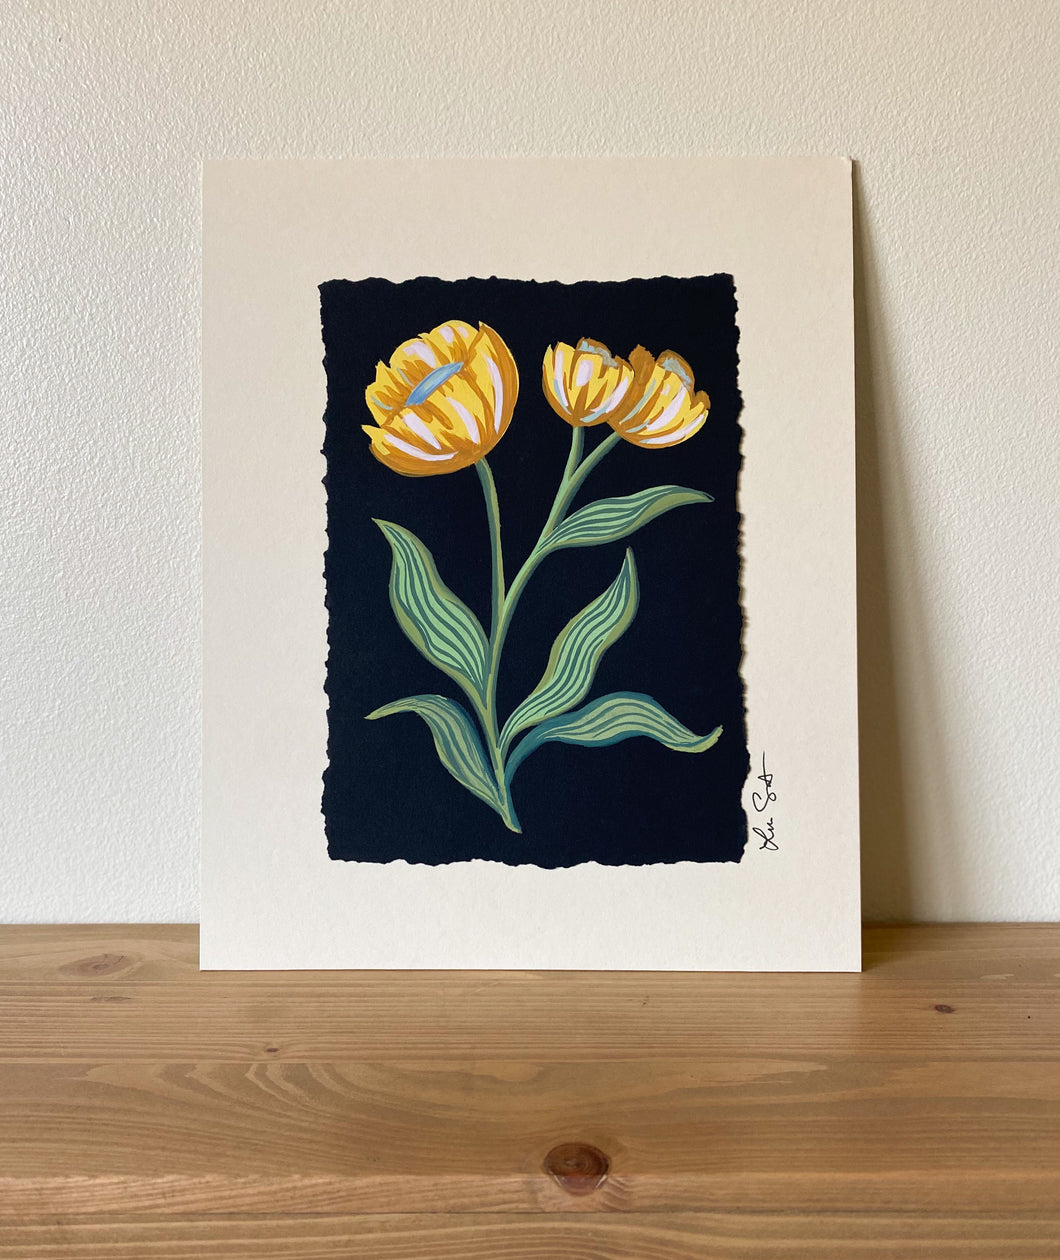 Hand-painted Golden Flowers in Gouache with Hand Torn Edge